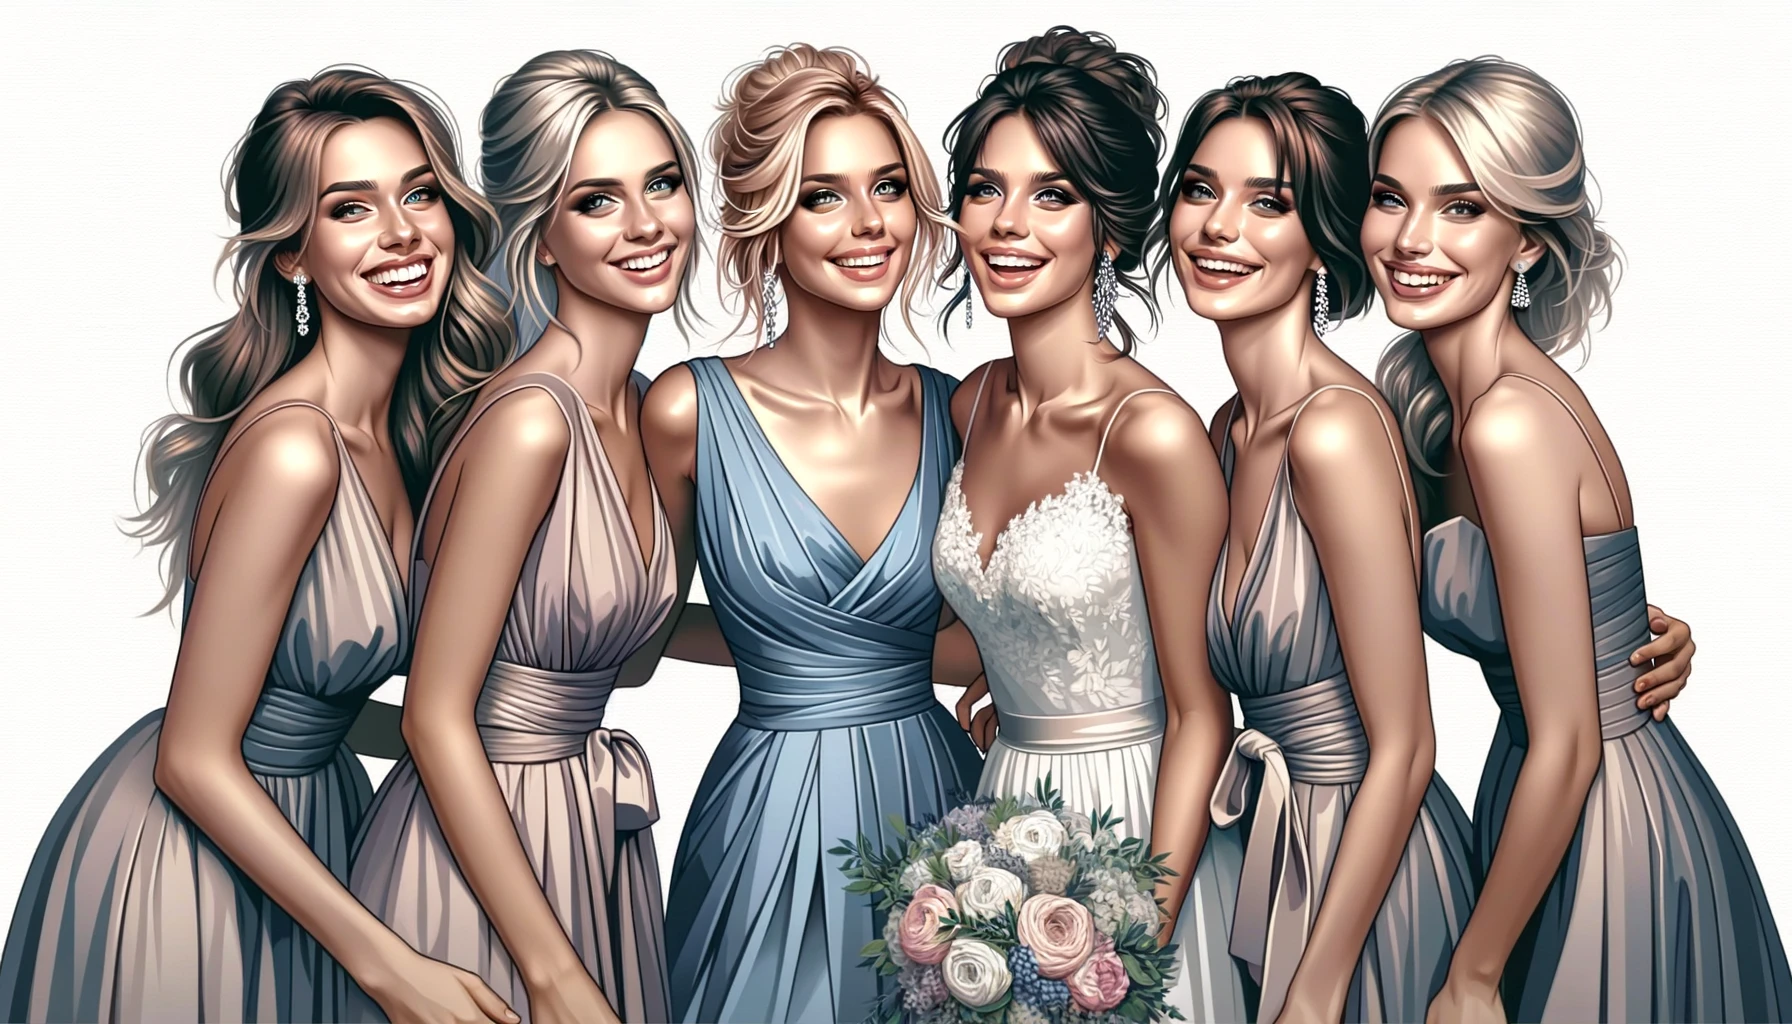 fun marriage facts about bridesmaids